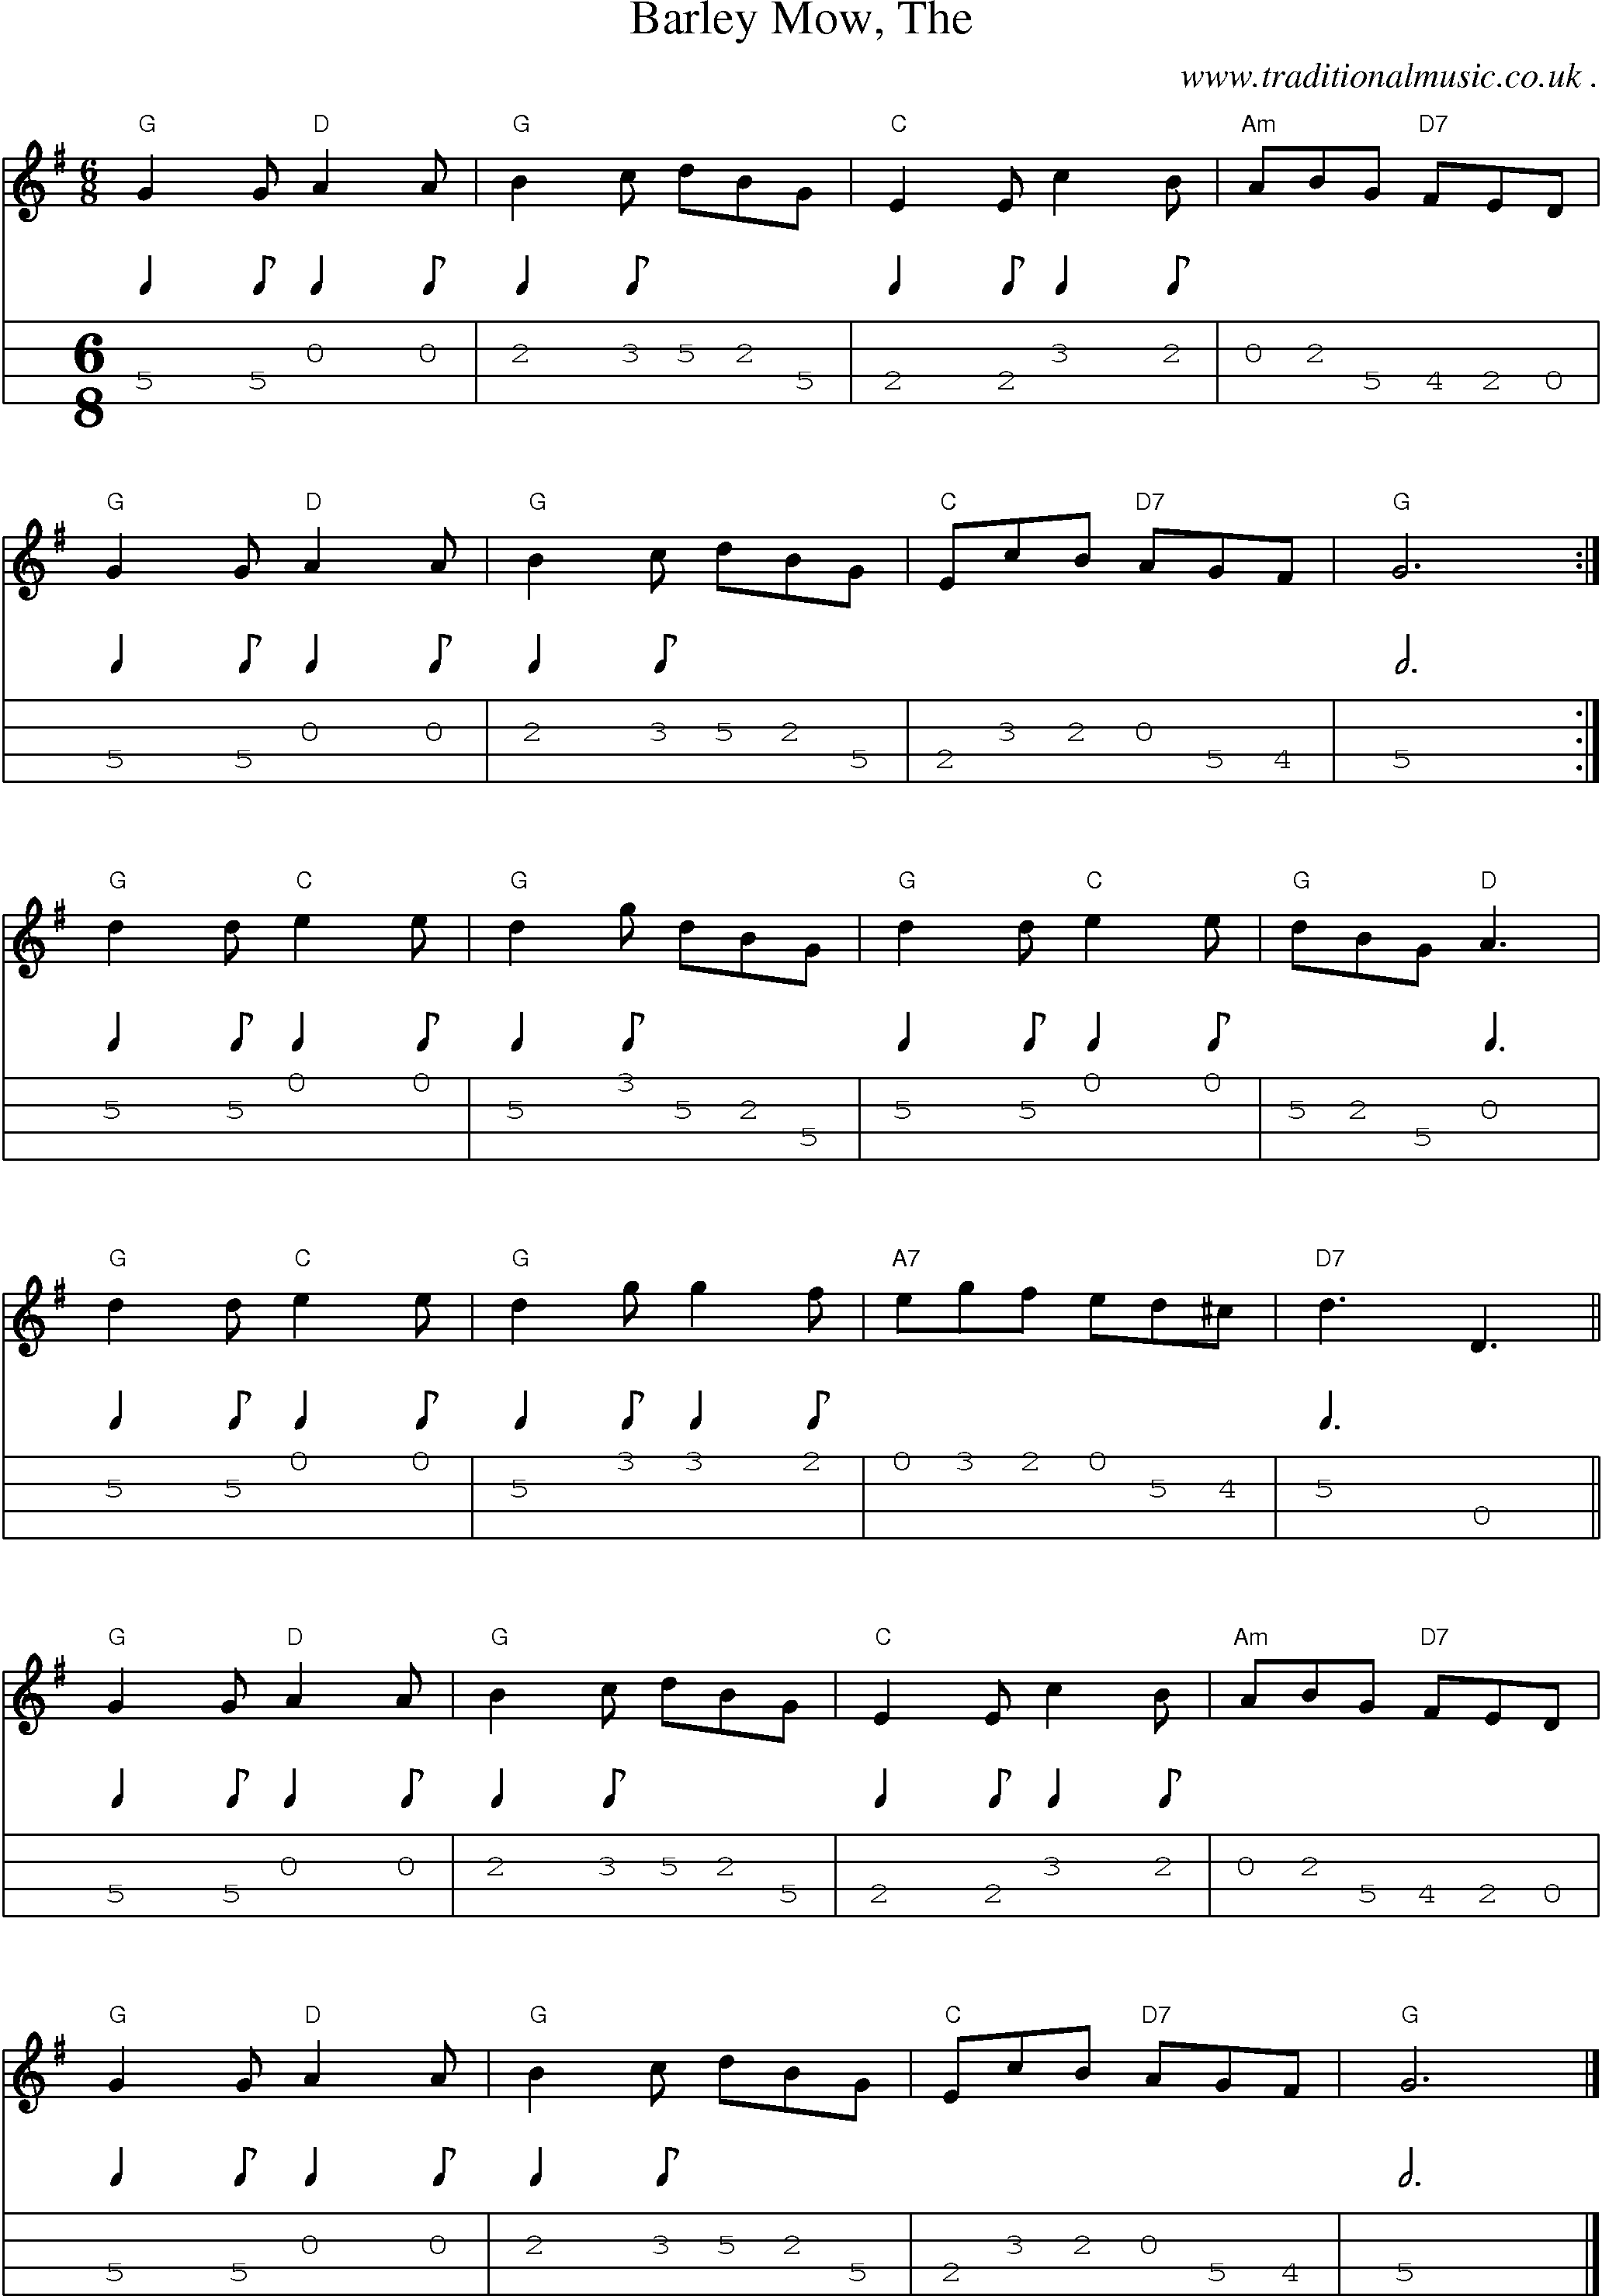 Music Score and Guitar Tabs for Barley Mow The